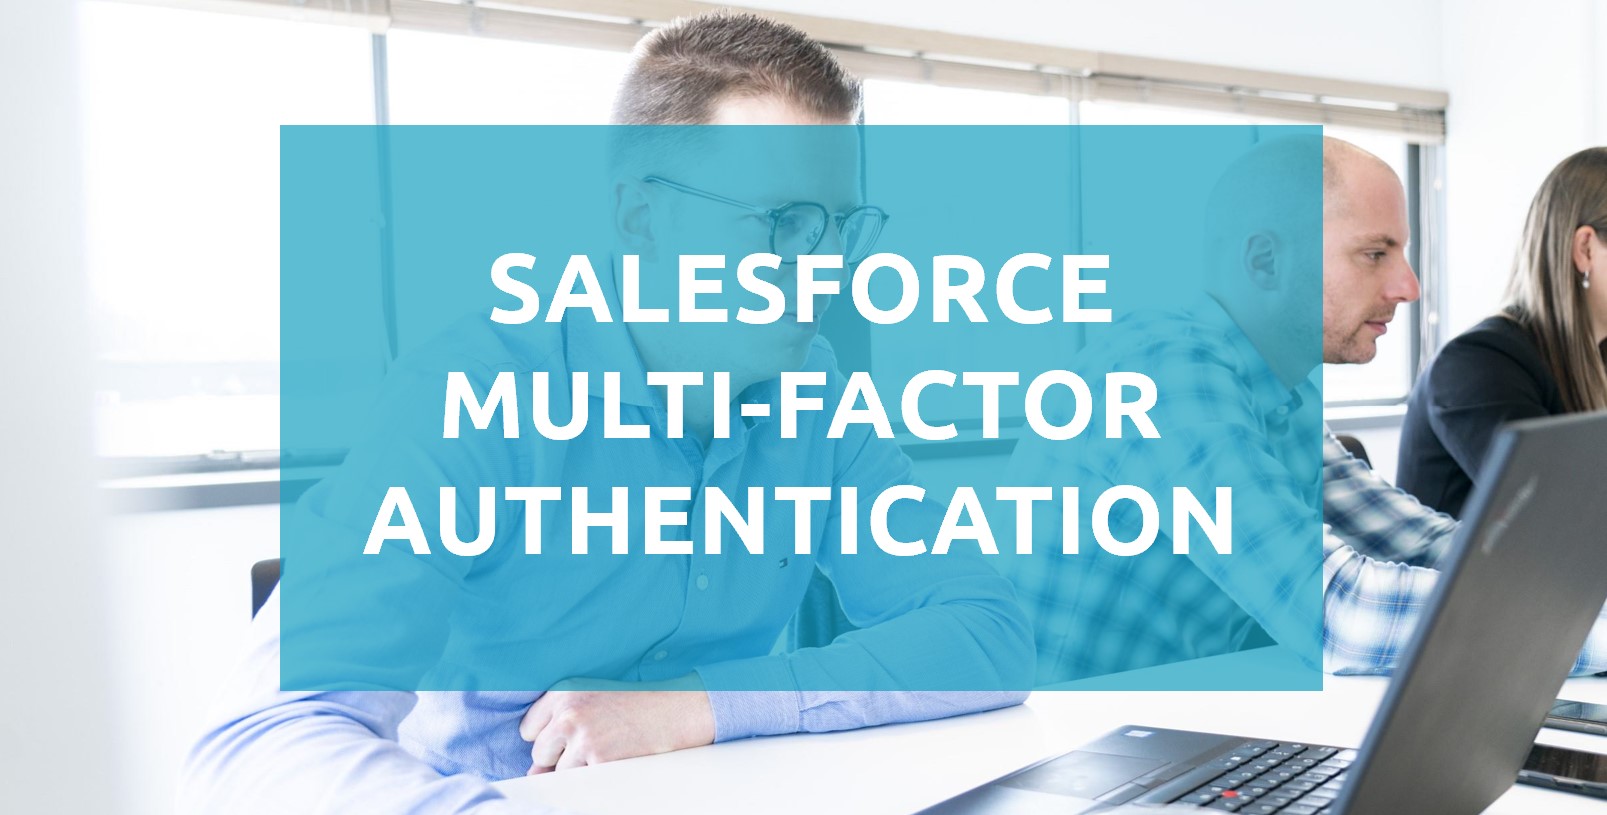 Activate Salesforce Multi-factor Authentication by 2022